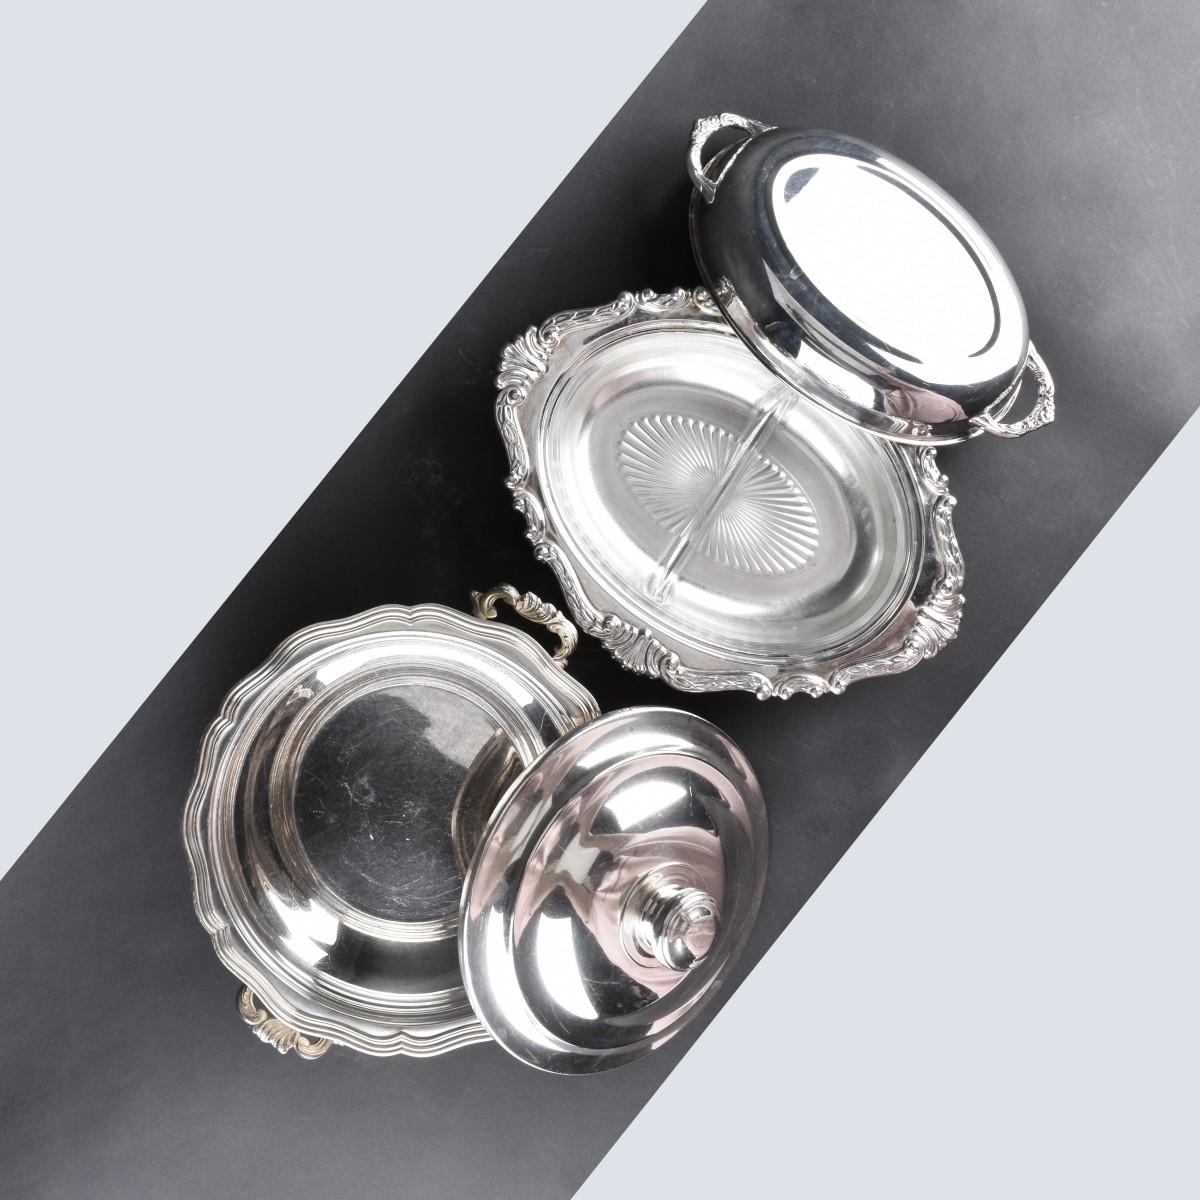 Five Silverplate Tabletop Serving Pieces